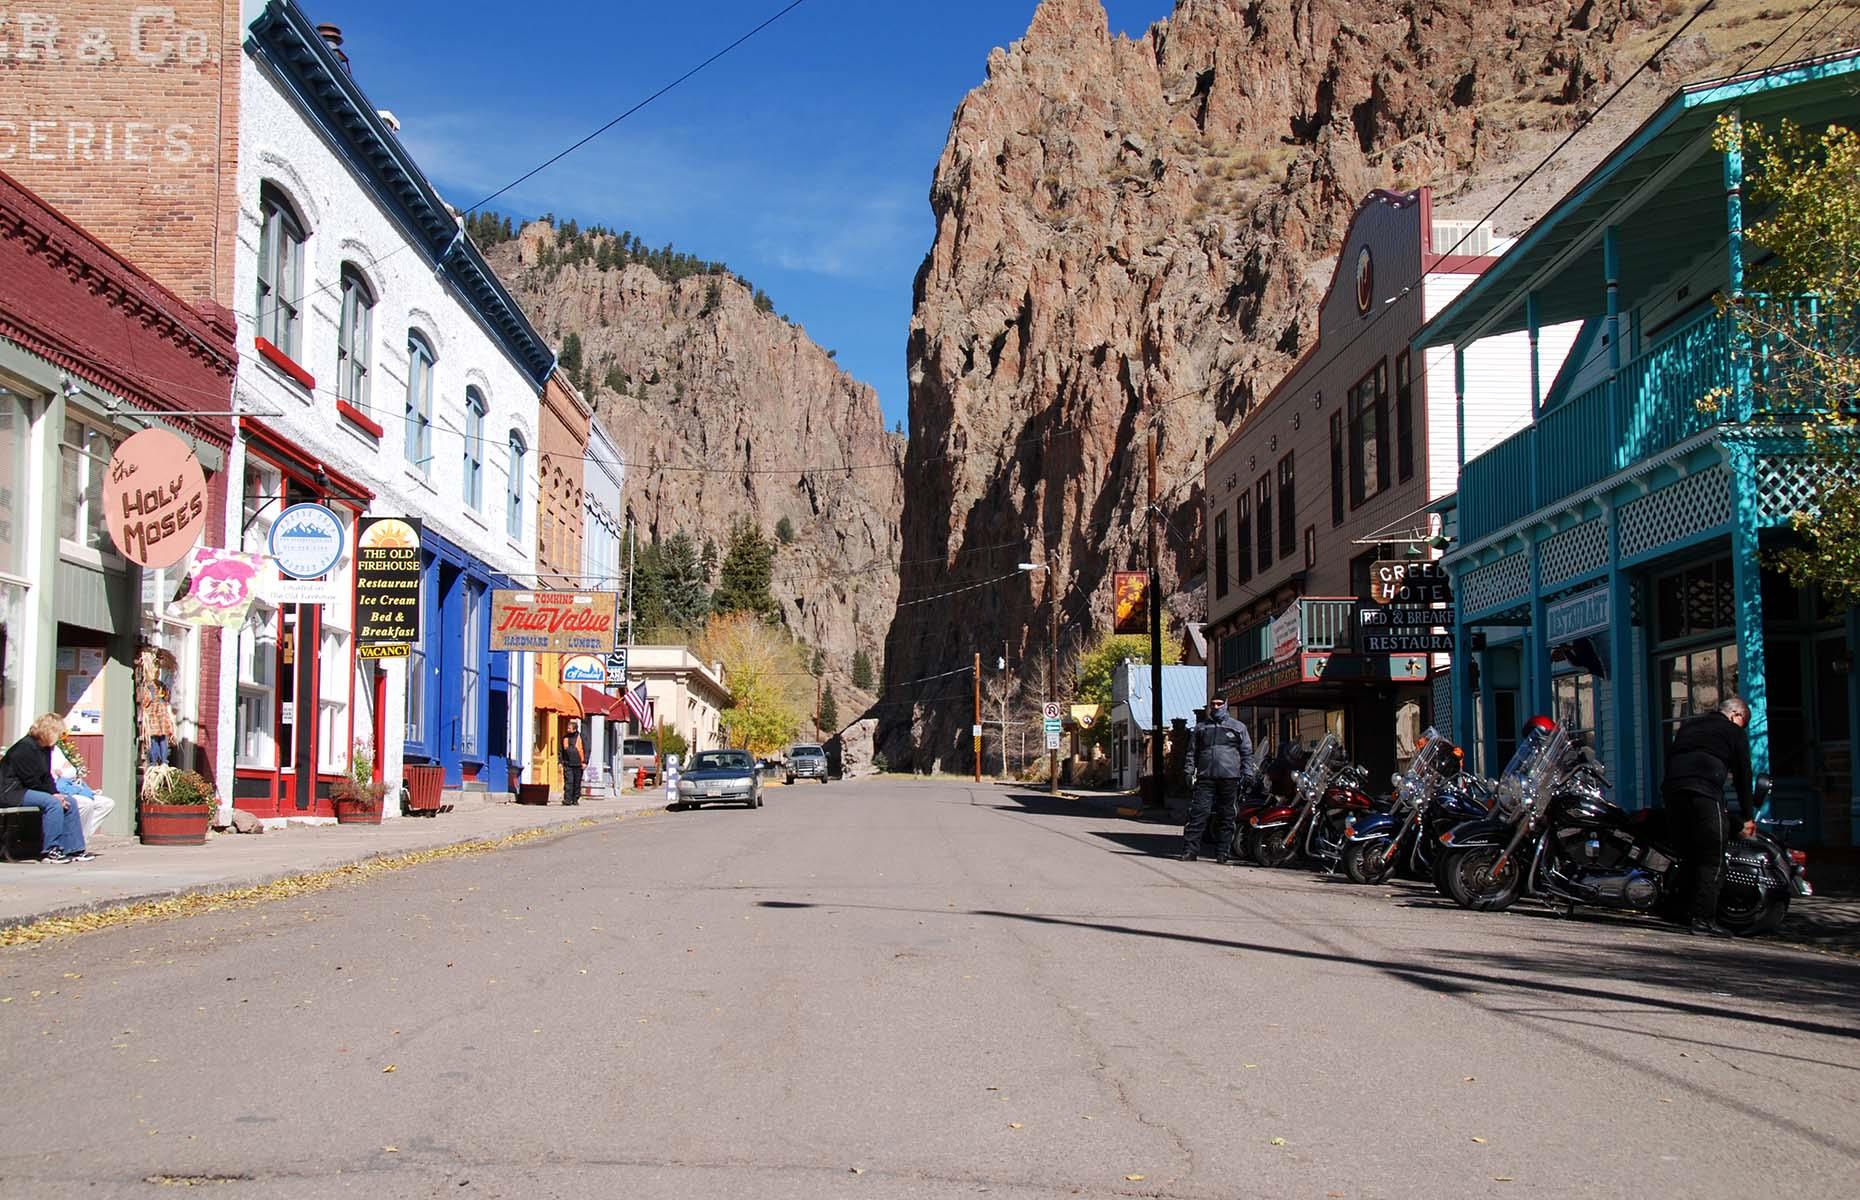 <p>Running for nearly 120 miles (193km), Colorado's <a href="https://www.colorado.com/articles/colorado-scenic-byway-silver-thread">Silver Thread</a> connects two historic districts – Lake City and Creede (pictured). The roadside remains strewn with abandoned mining structures and other remnants of decades gone by, leaving clues of what life would have been like in these rugged parts. There are plenty of natural wonders to take in as well. Following Highway 149, the road shadows the upper reaches of the Rio Grande, revealing North Clear Creek Falls and the shark-like fin of Uncompahgre Peak.</p>